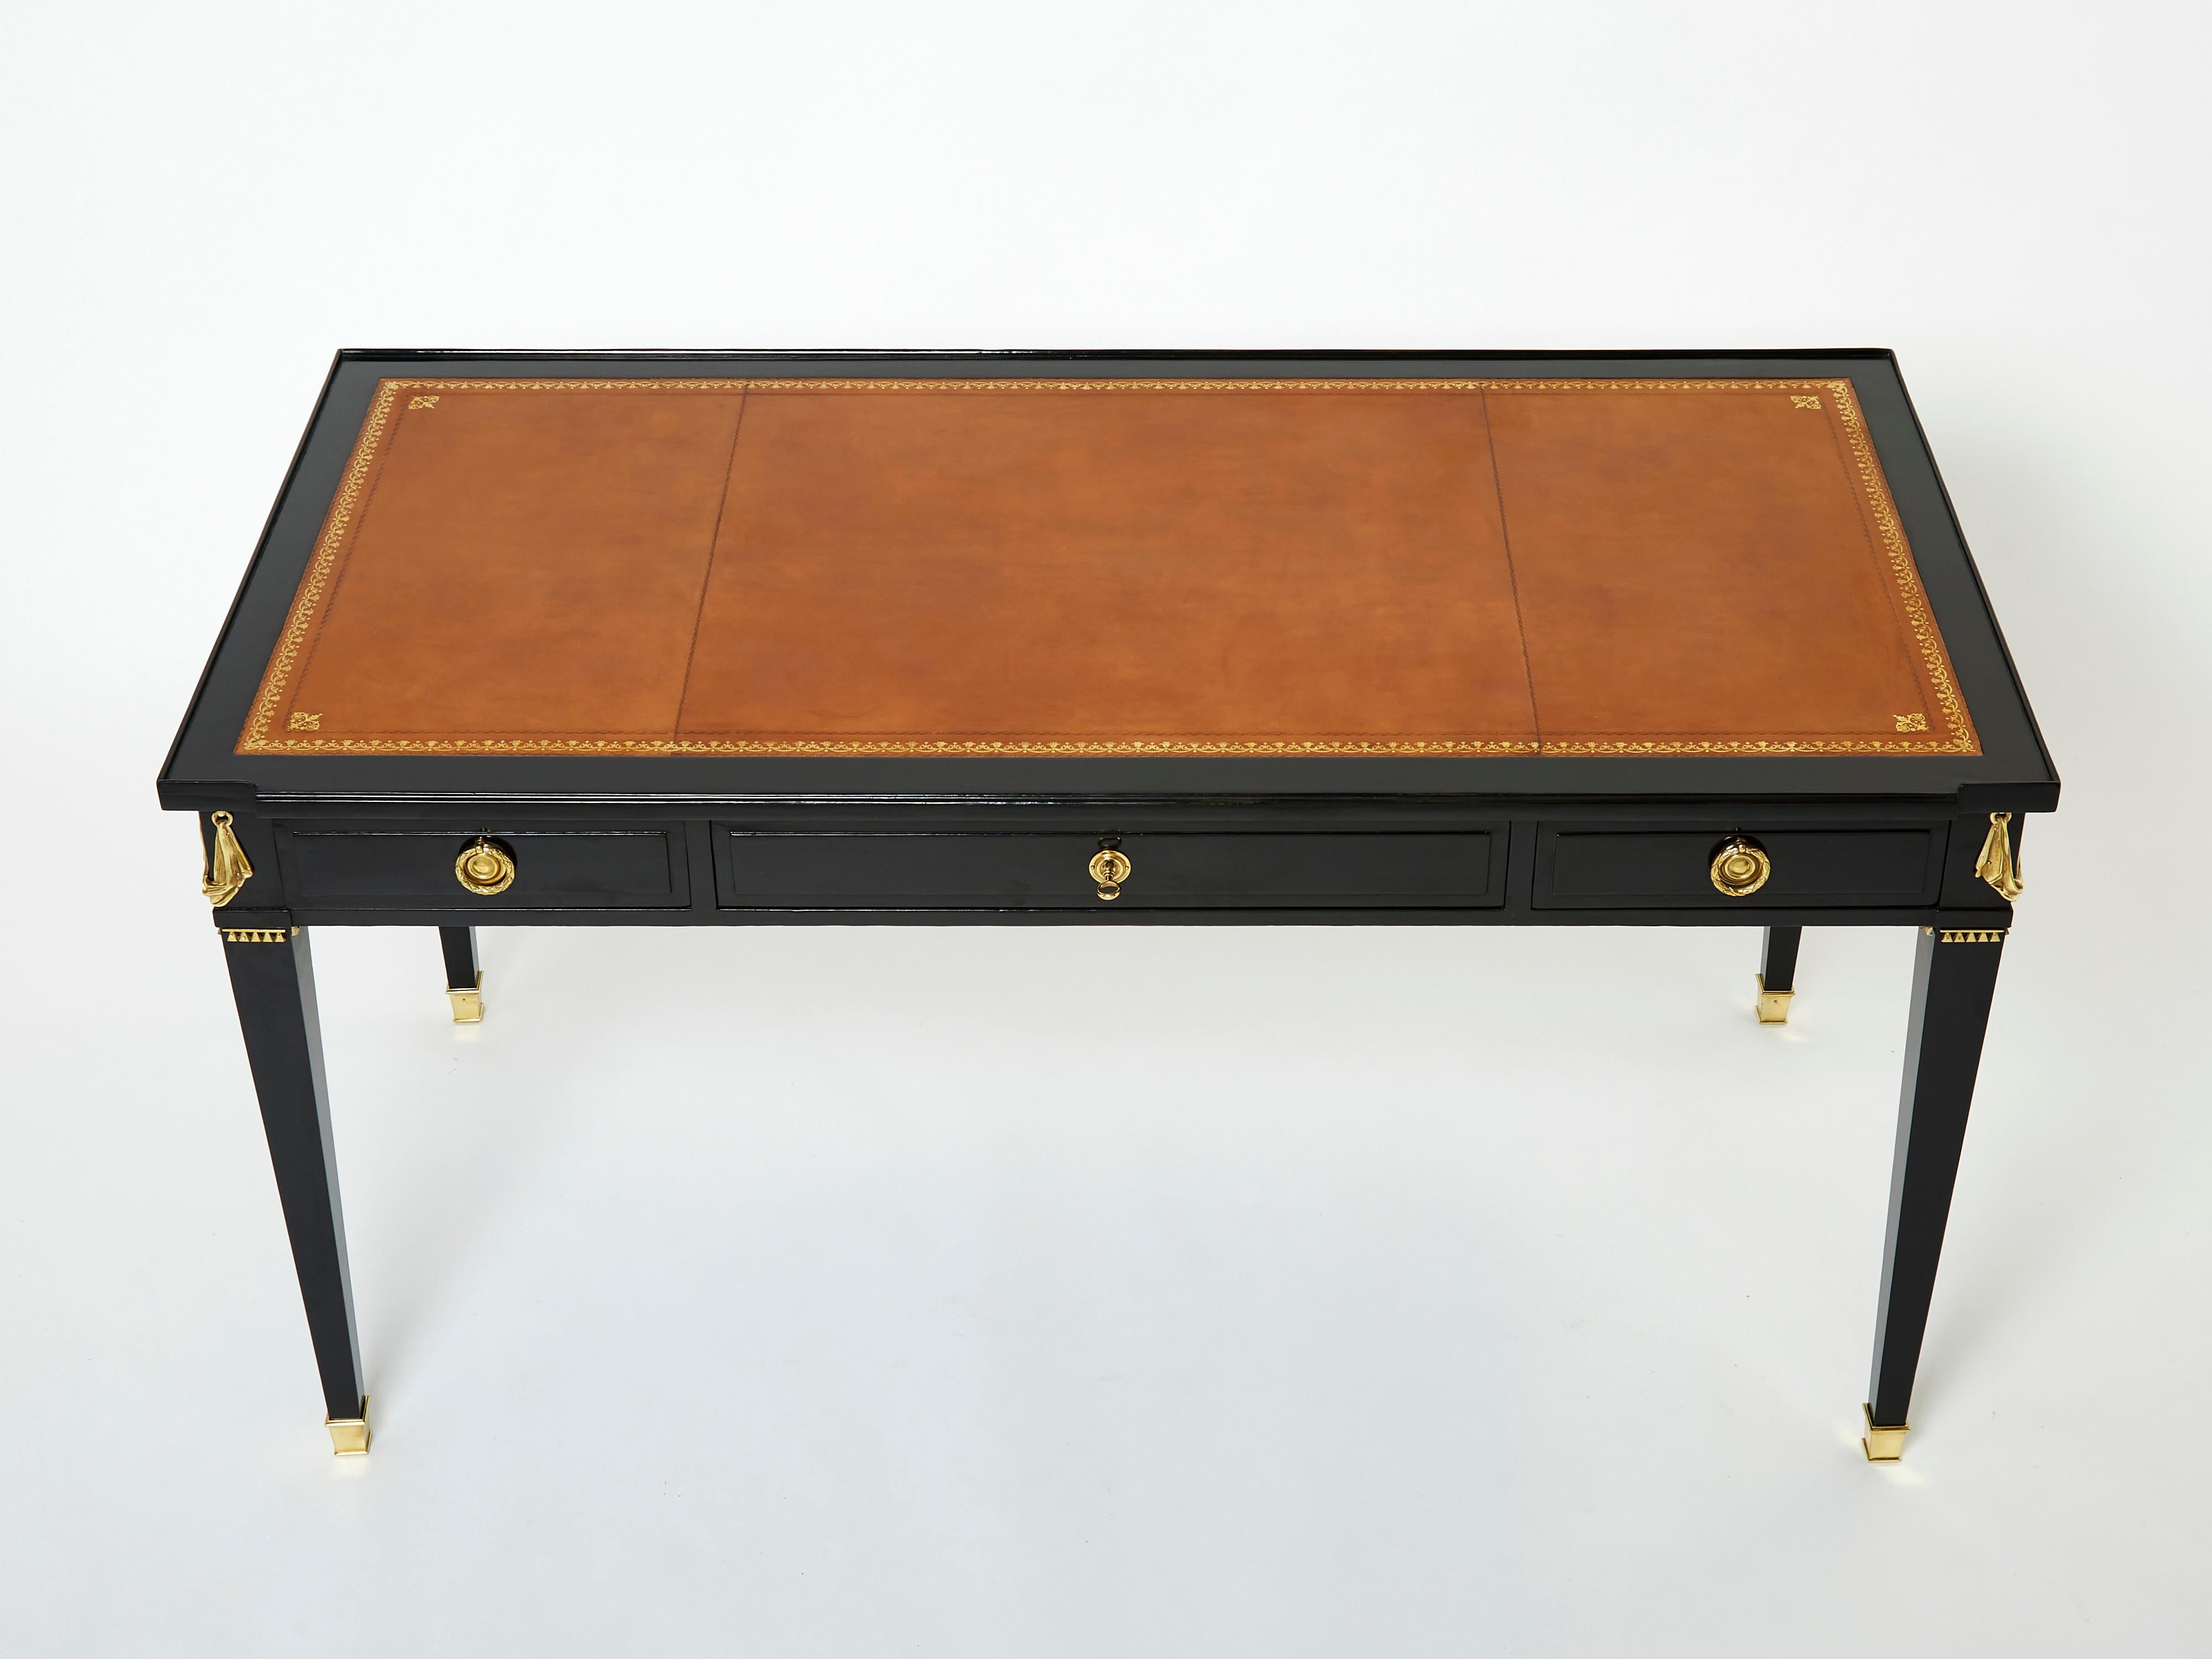 This rare Louis XVI style ebonized desk stamped Maison Jansen has been made in the early 1950s with black varnished mahogany wood, cognac leather top, and rich gilt bronze decor and accents. With its sleek rectangular bureau plat shape, fluted feet